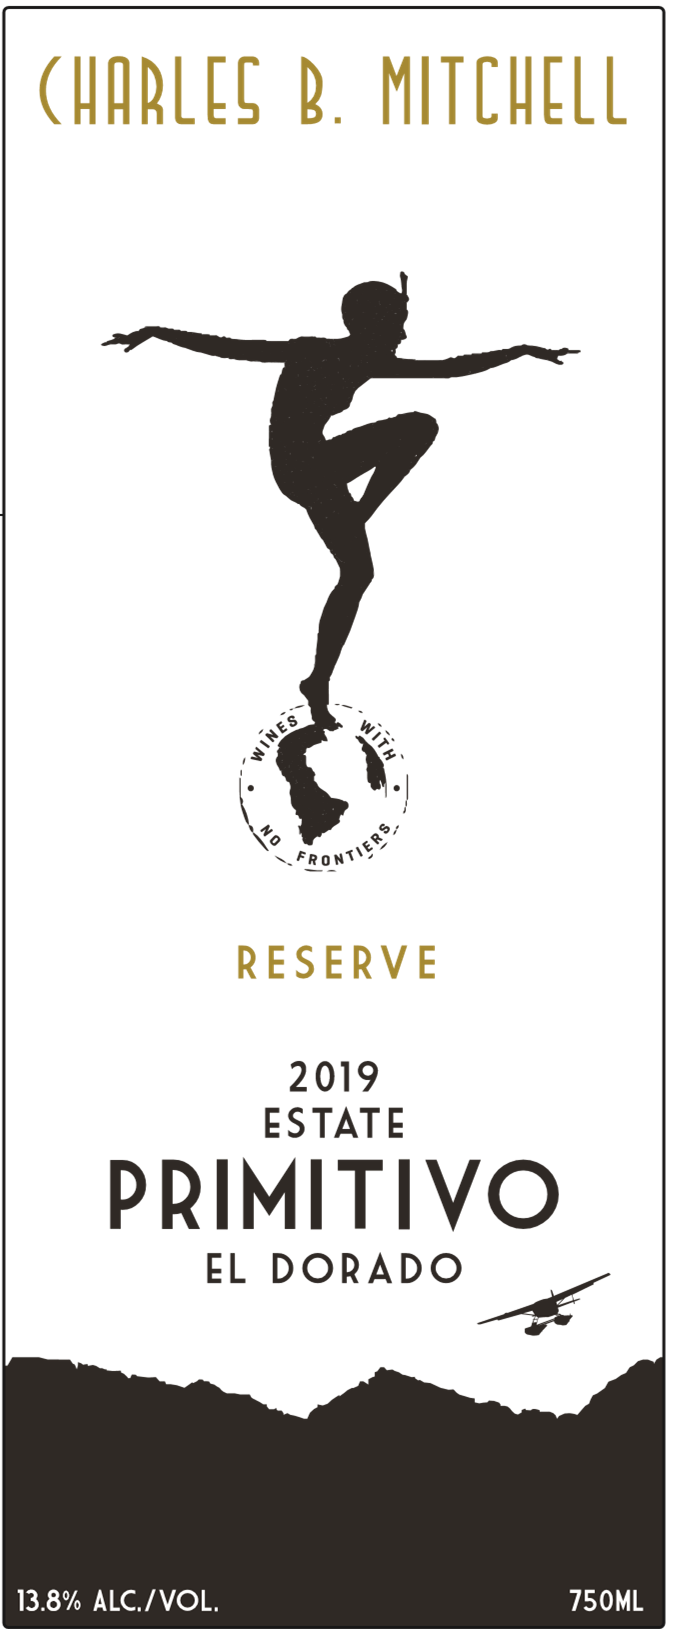 Product Image for 2019 Primitivo